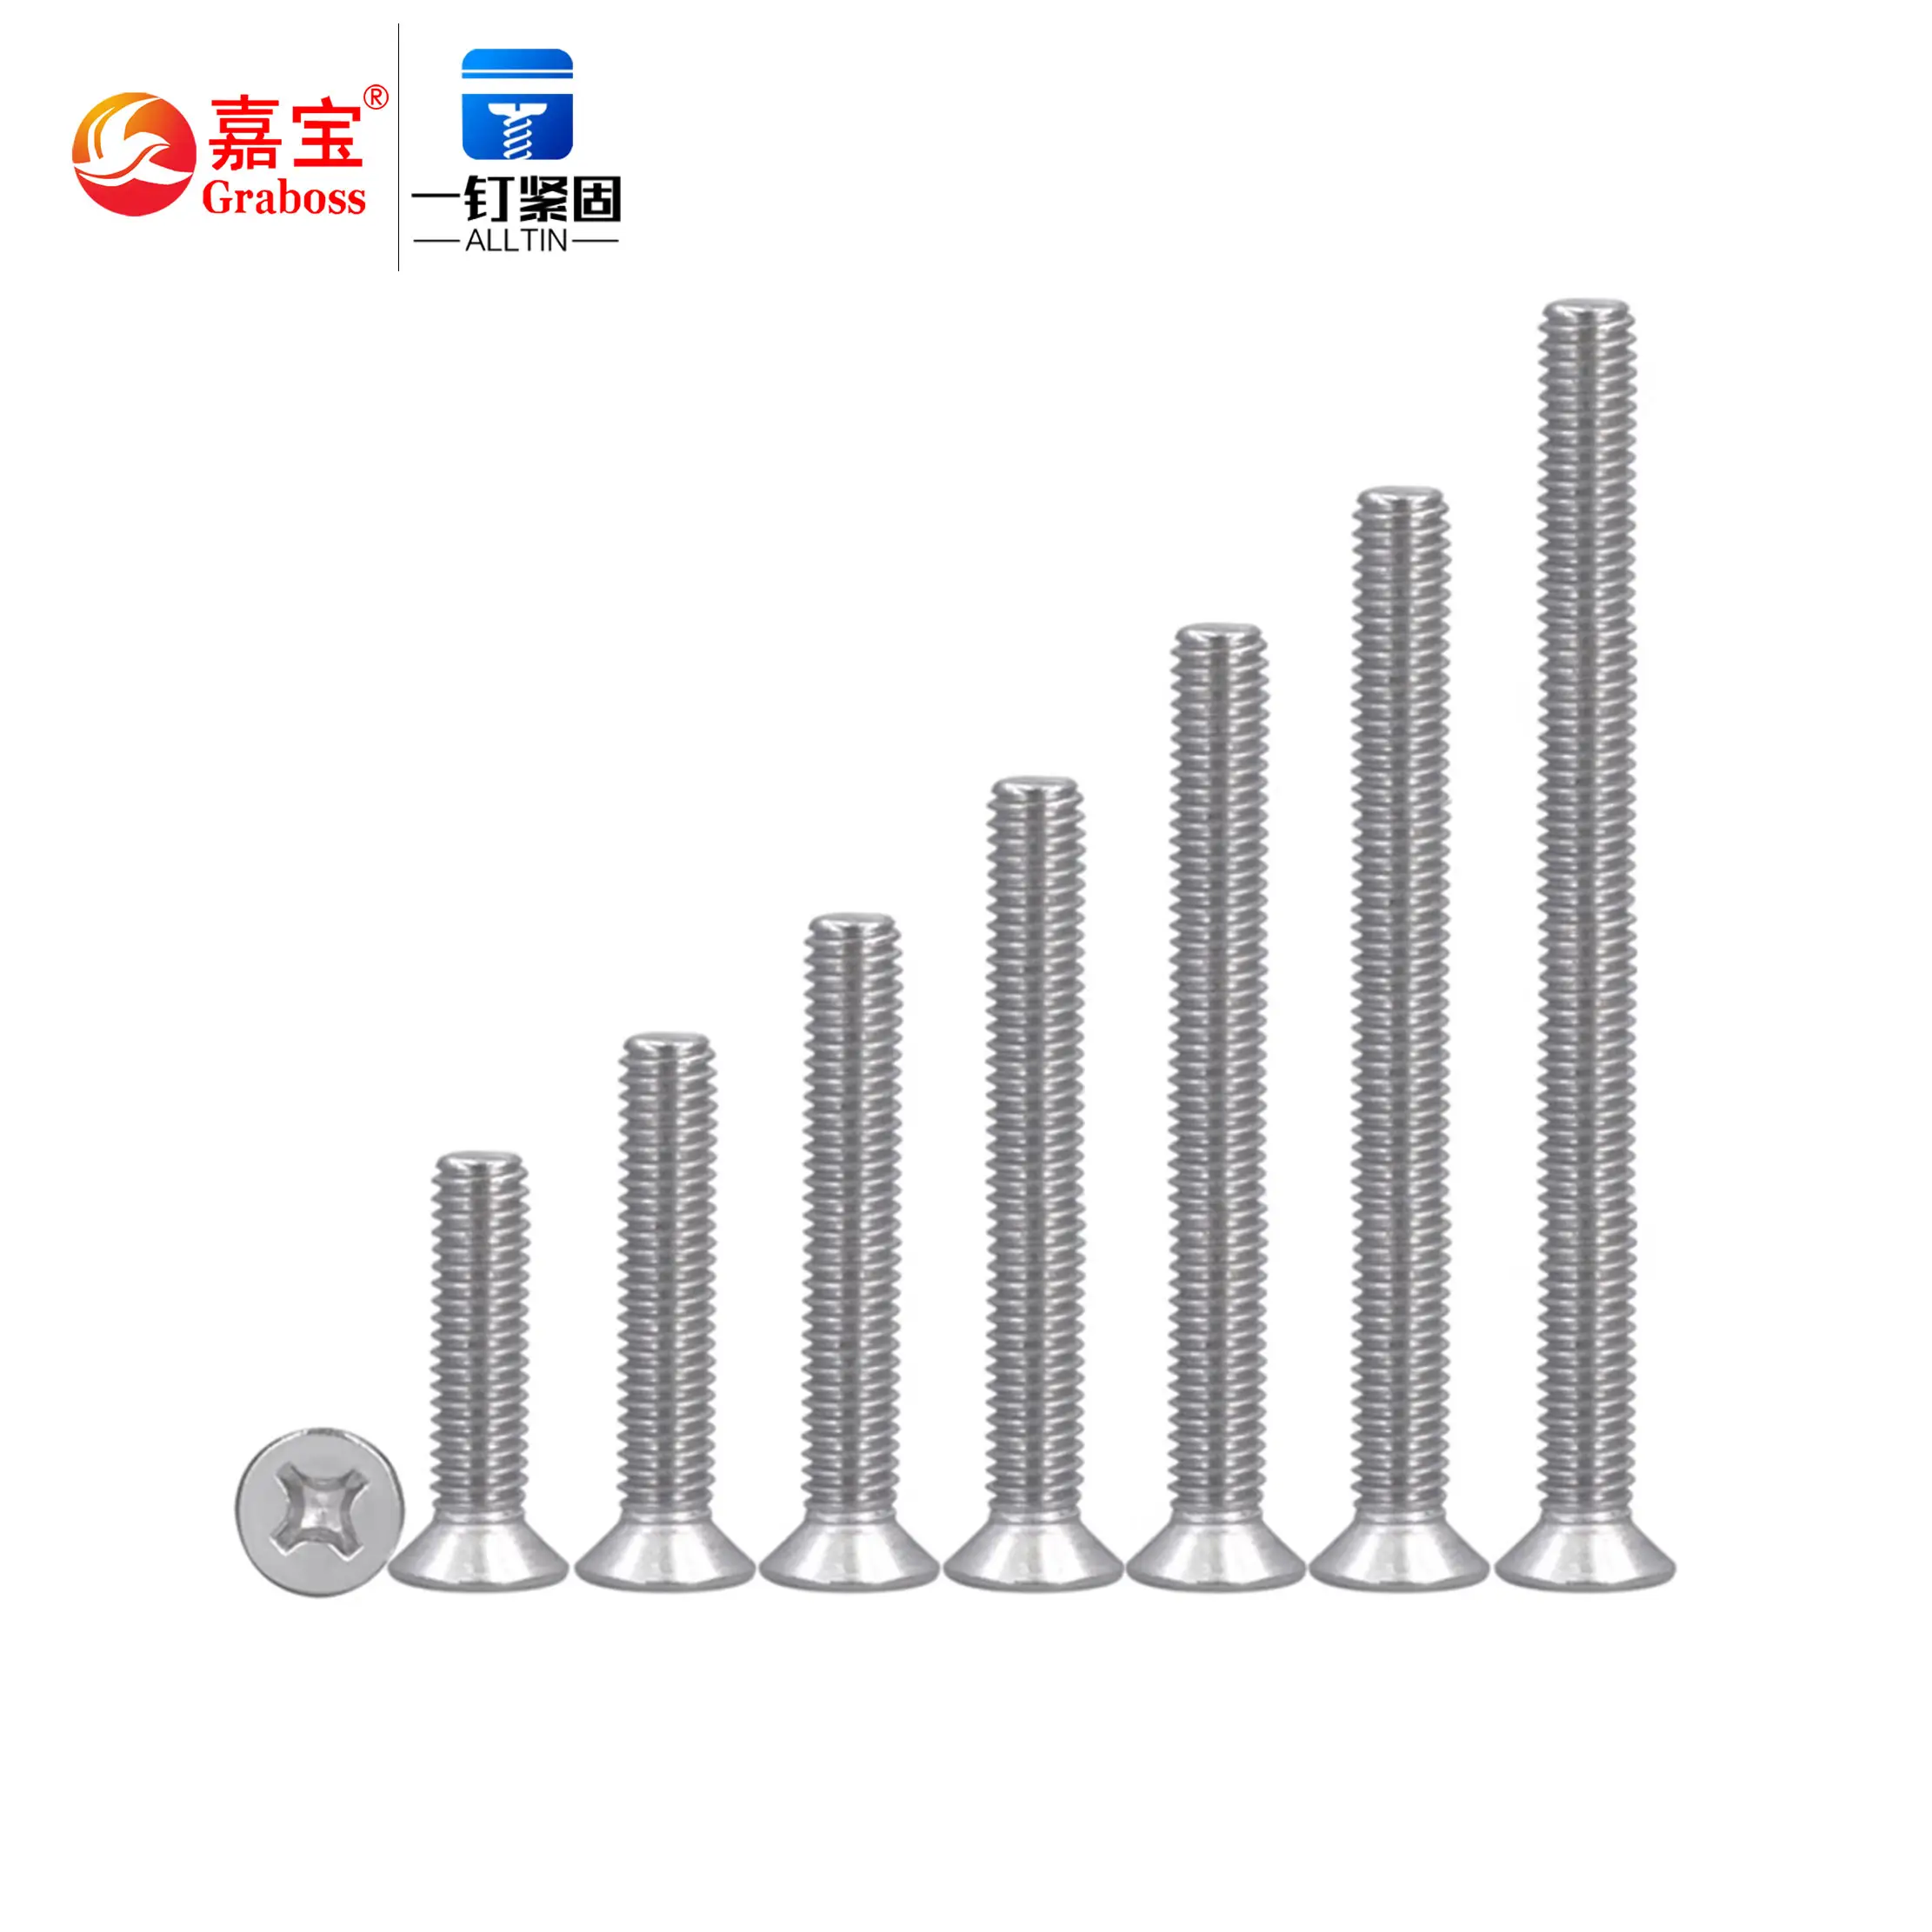 Manufacturers of 304 stainless steel extended switch socket panel screw countersunk head screw M2 M3 M4 M5 M6